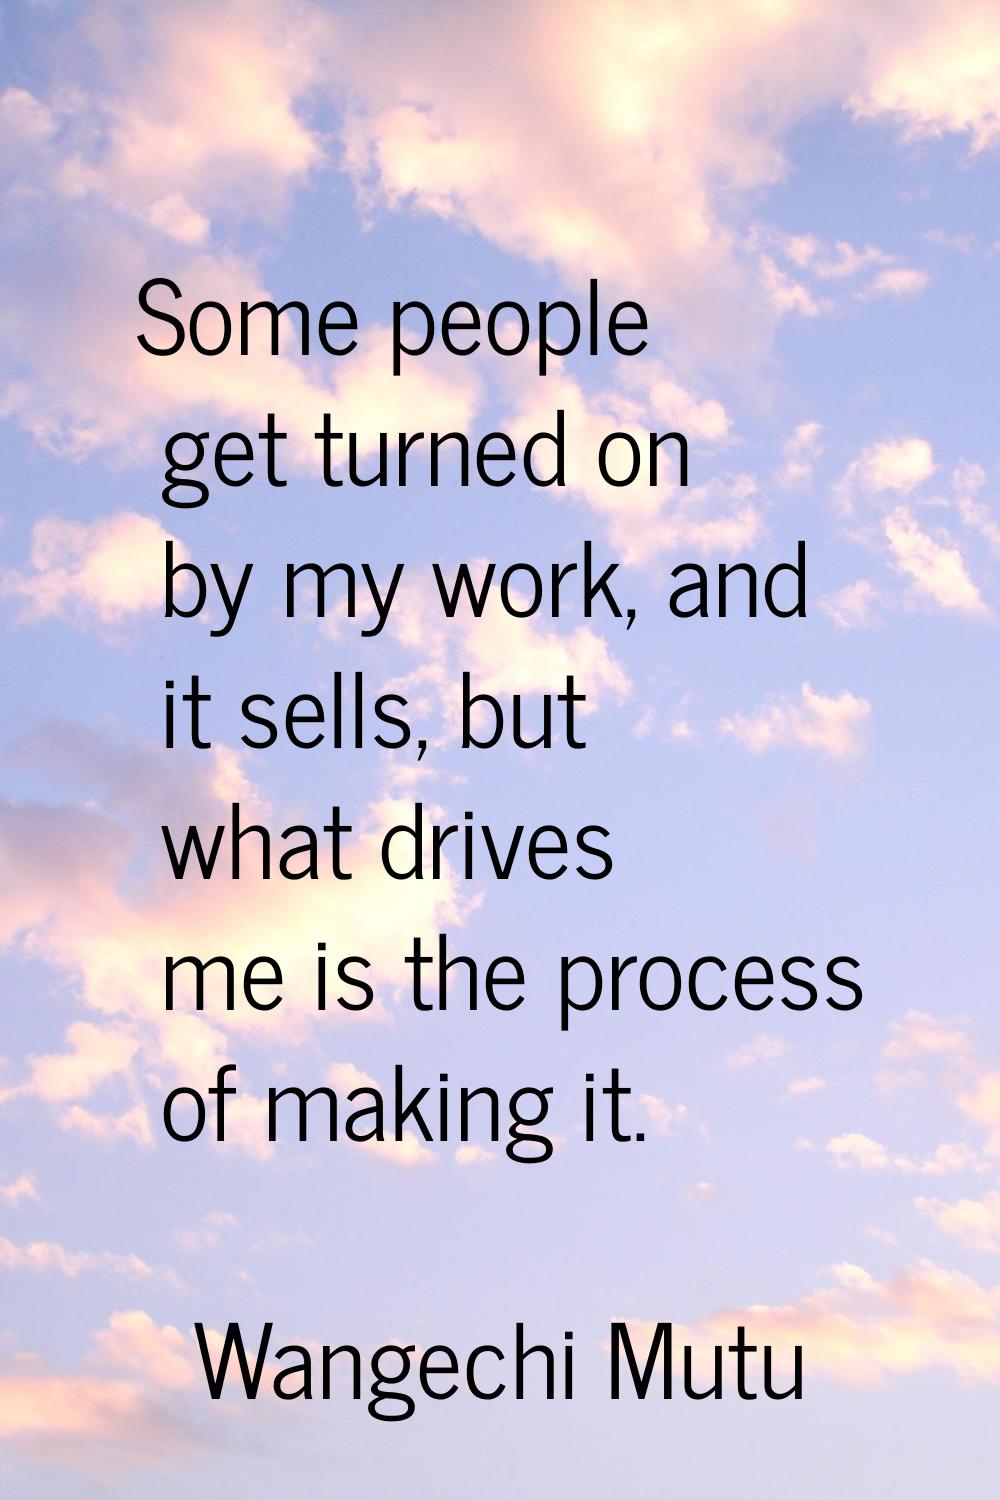 Some people get turned on by my work, and it sells, but what drives me is the process of making it.